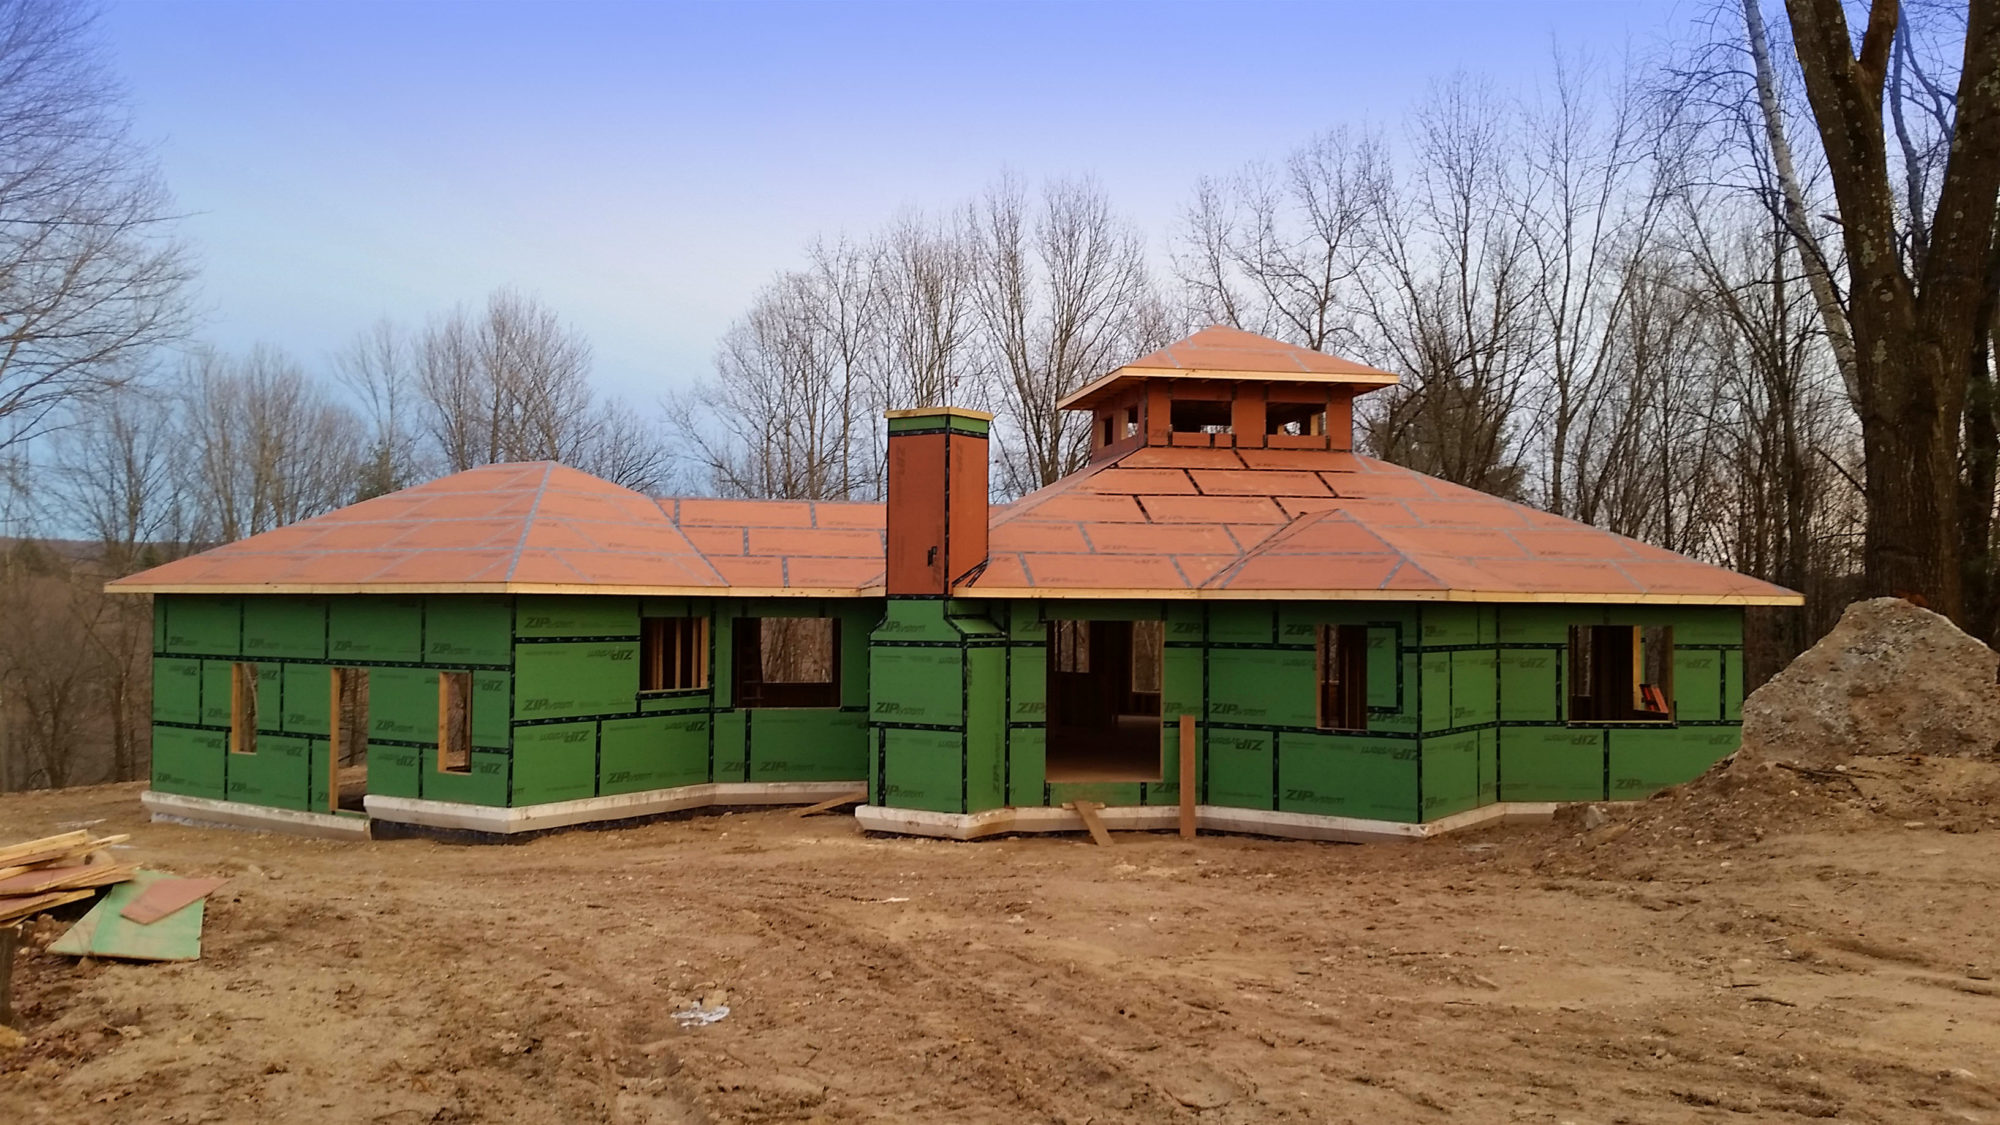 Dan’s Construction Service Inc builds a custom home in Ludlow, MA